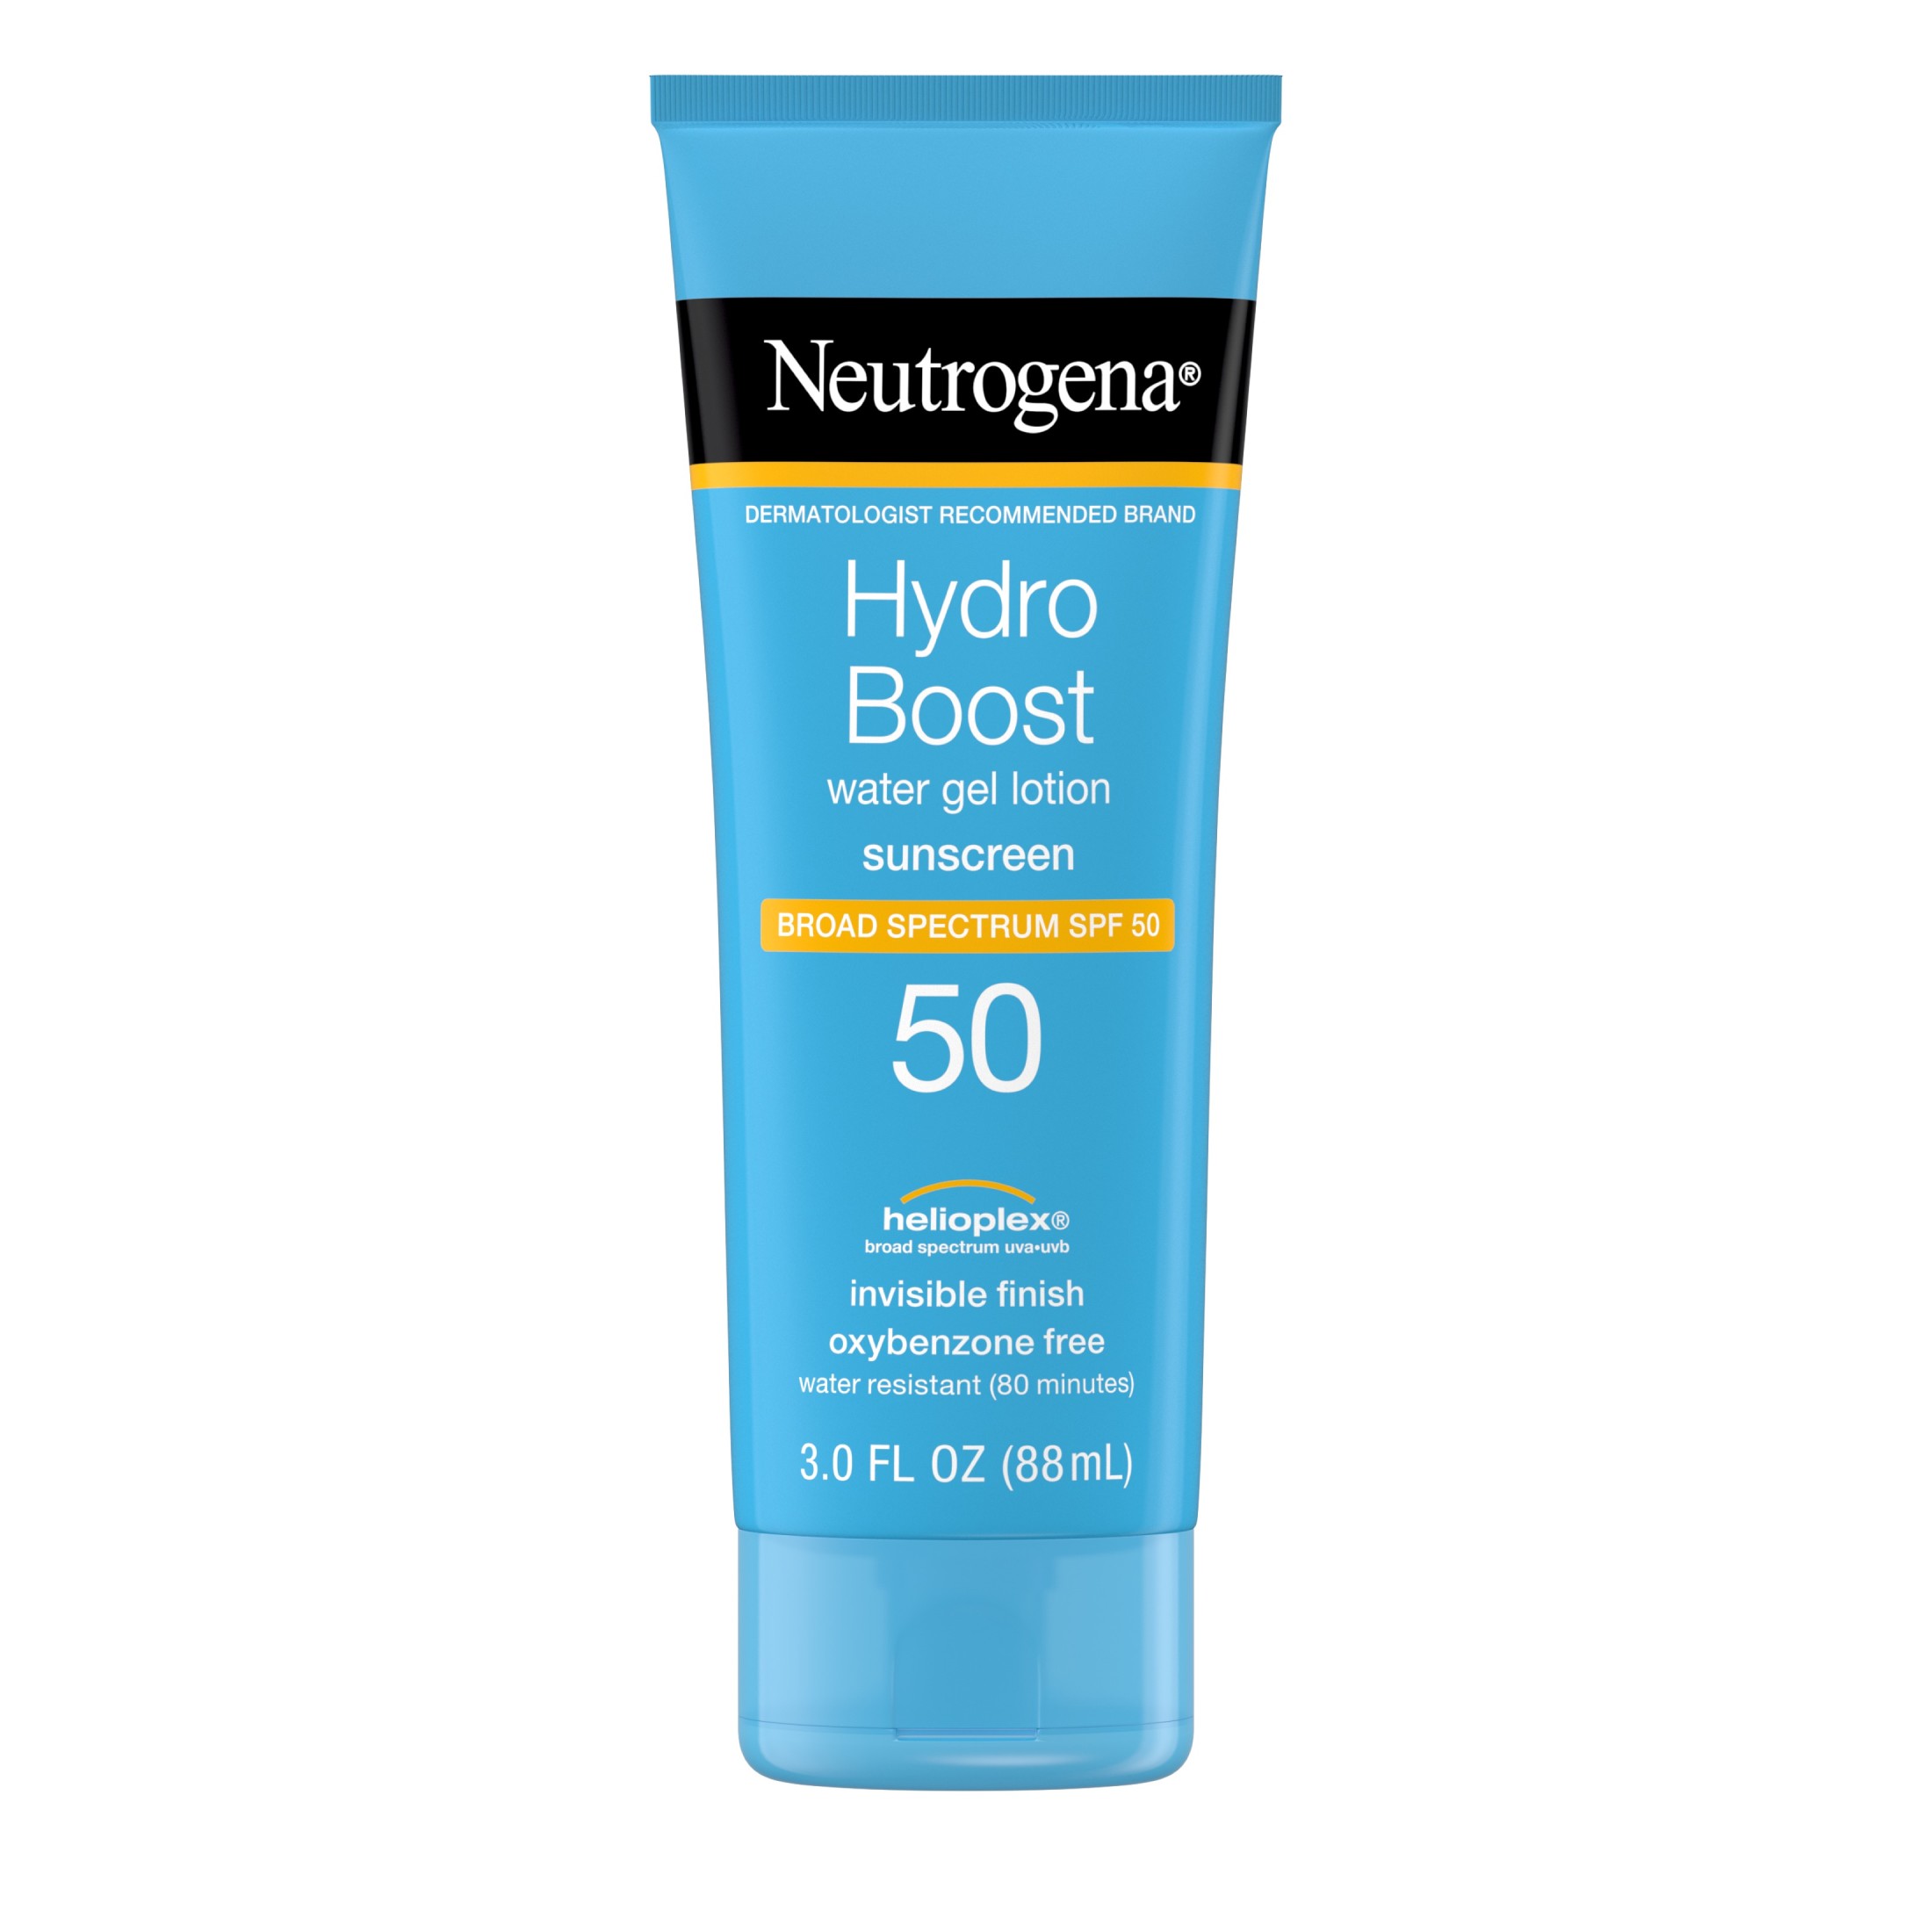 Neutrogena Hydro Boost Moisturizing Gel Sunscreen Lotion for Face and Body, SPF 50, 3 oz - image 1 of 7